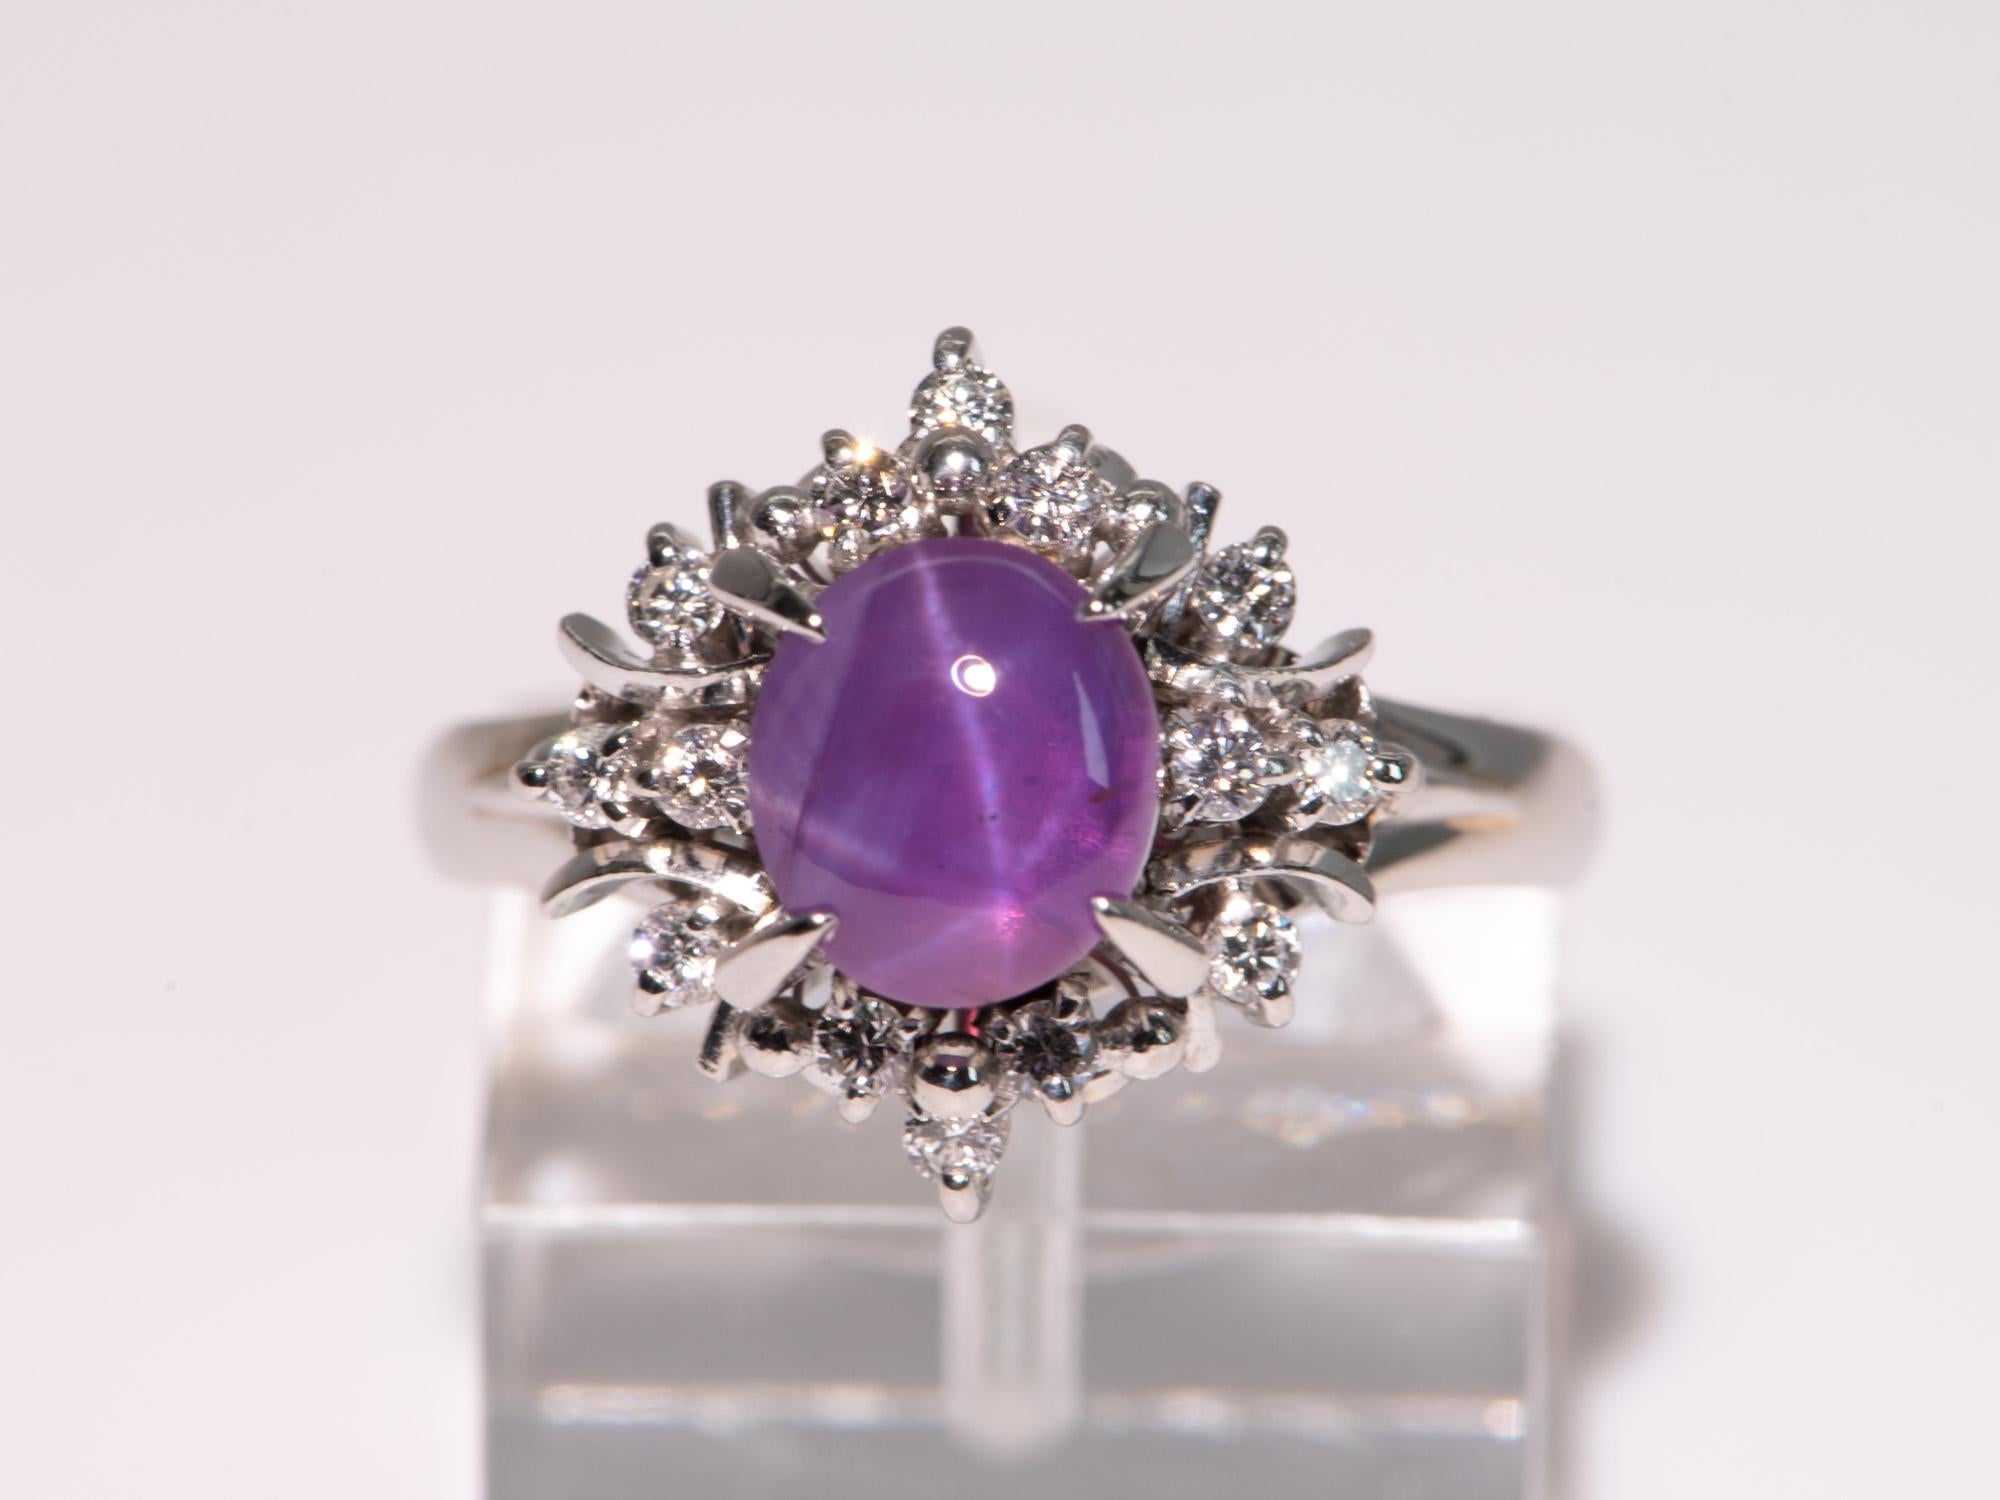 2.12ct Purple Star Sapphire Diamond Halo Ring Platinum R6721 In Excellent Condition For Sale In Osprey, FL